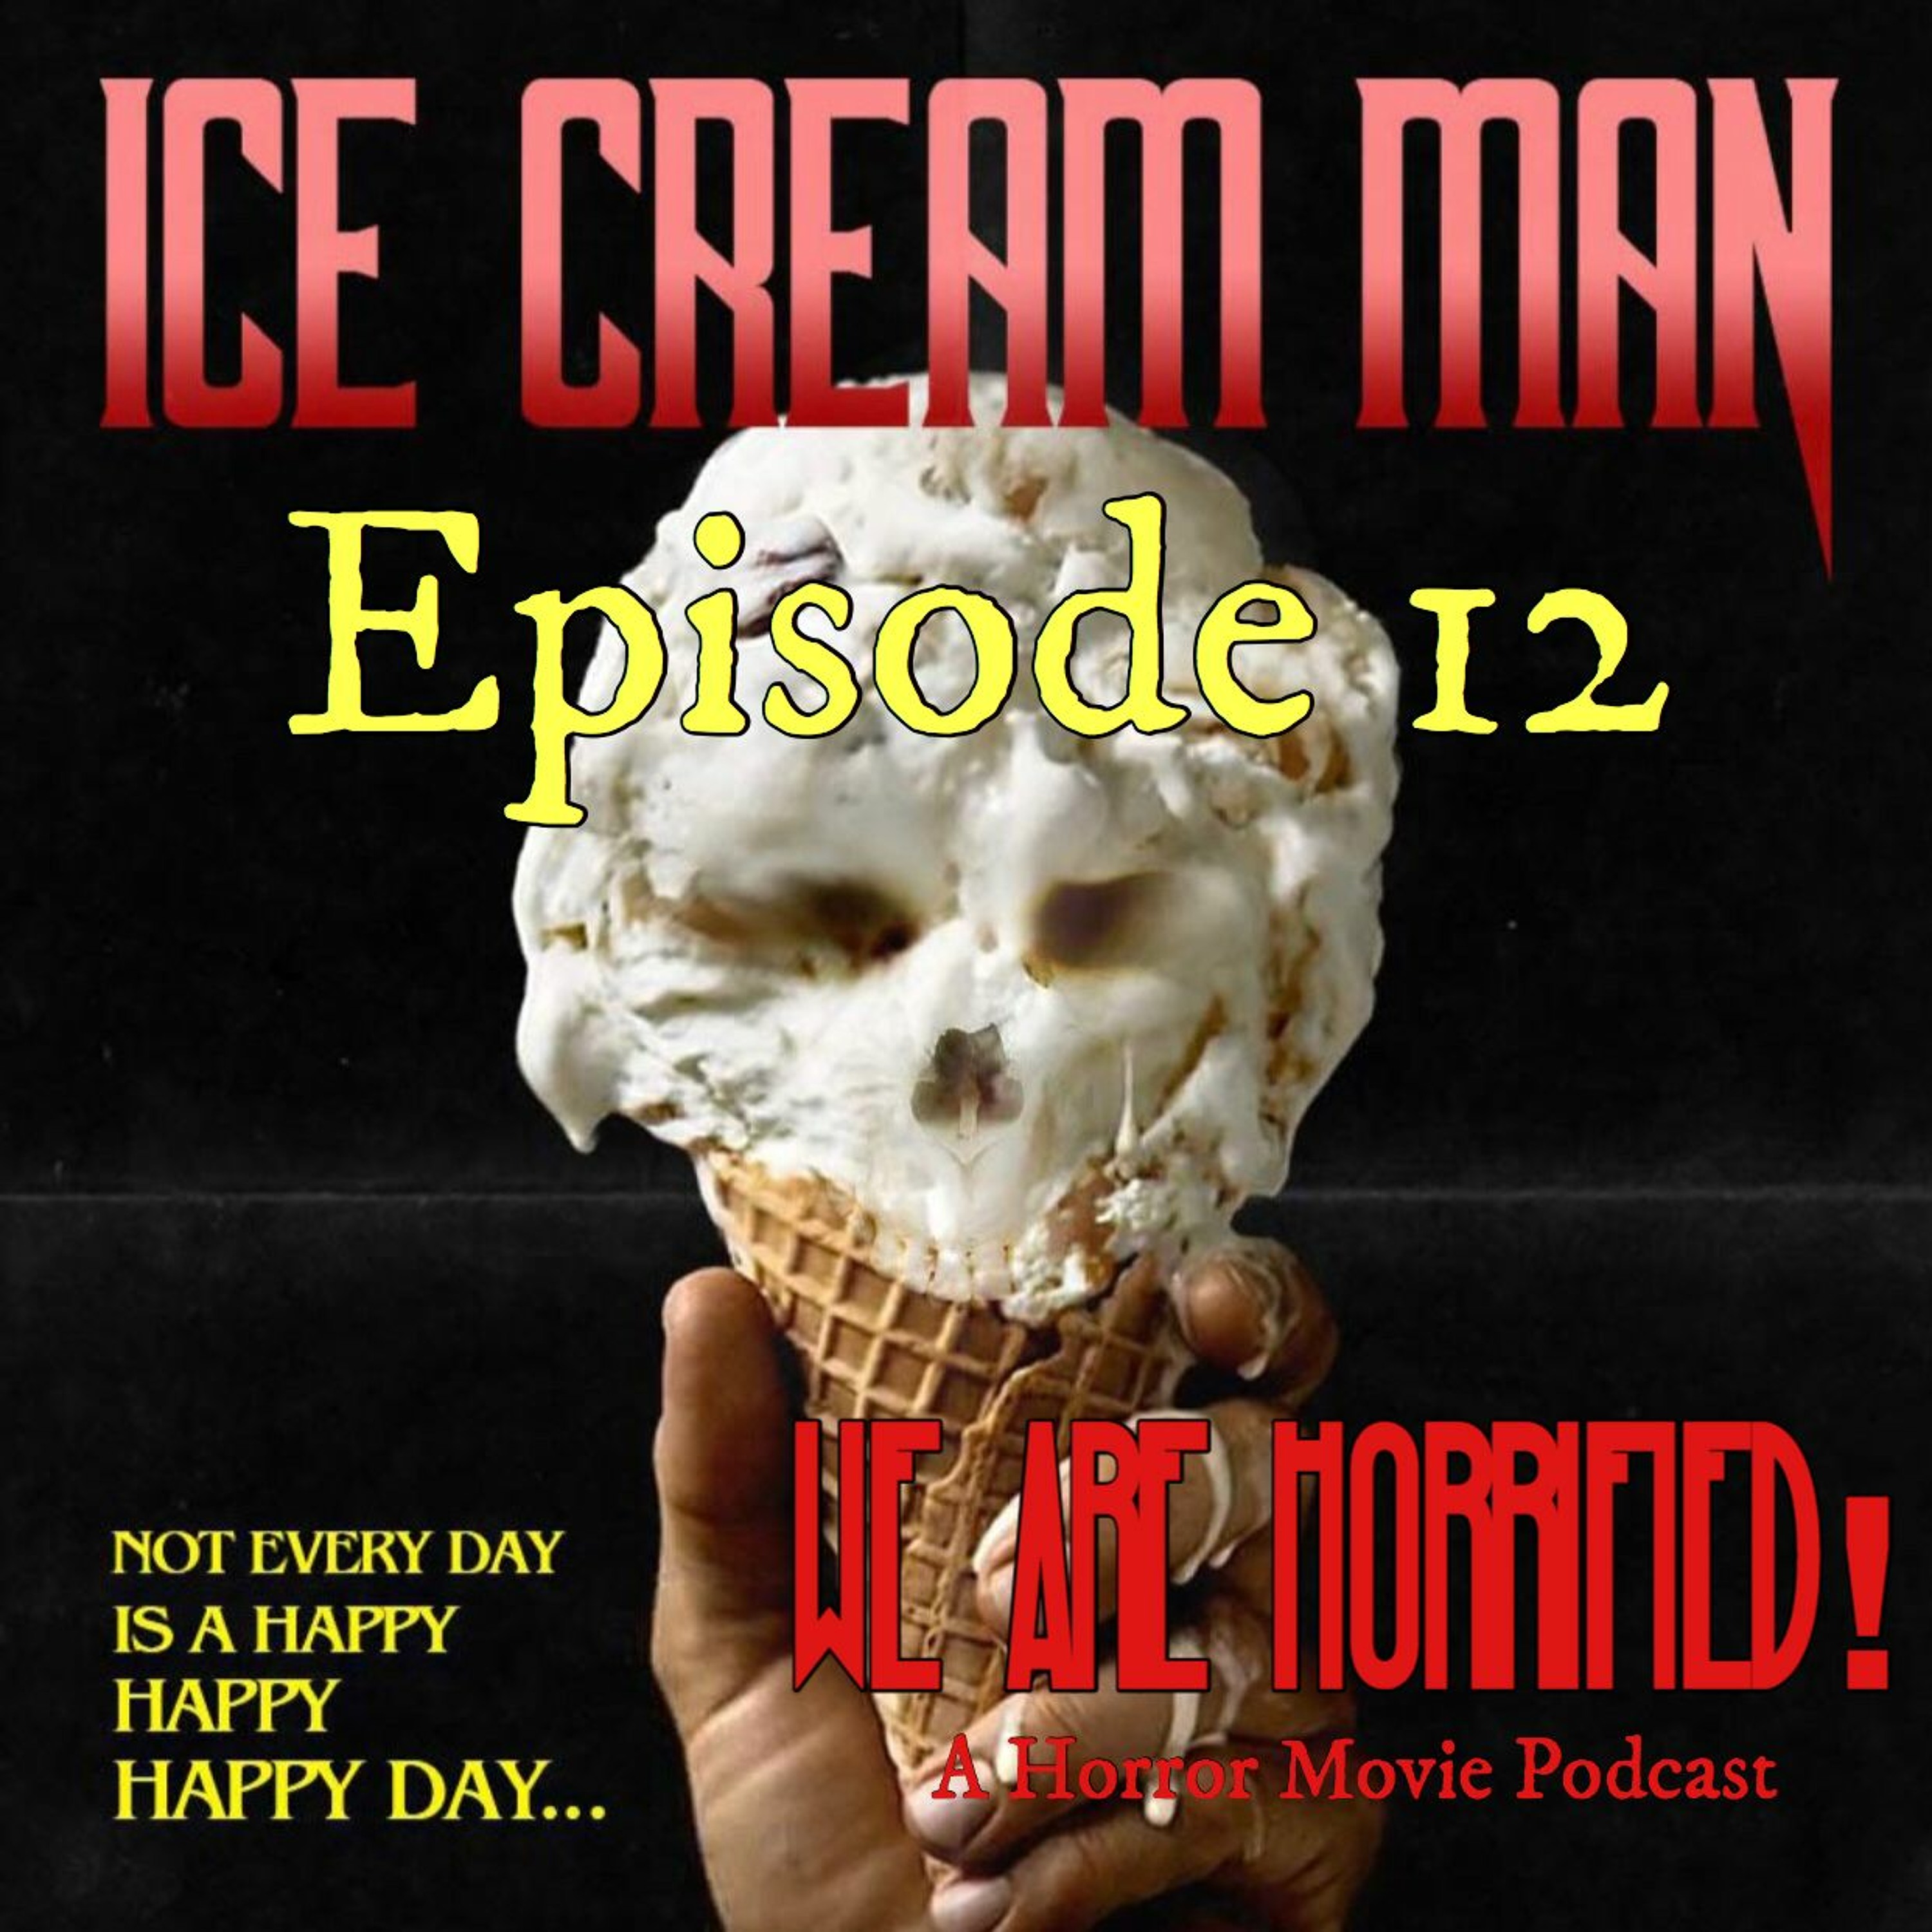 Episode 12 Ice Cream Man 1995 With Steve Arnold We Are Horrified A Horror Movie Podcast Podcast Podtail